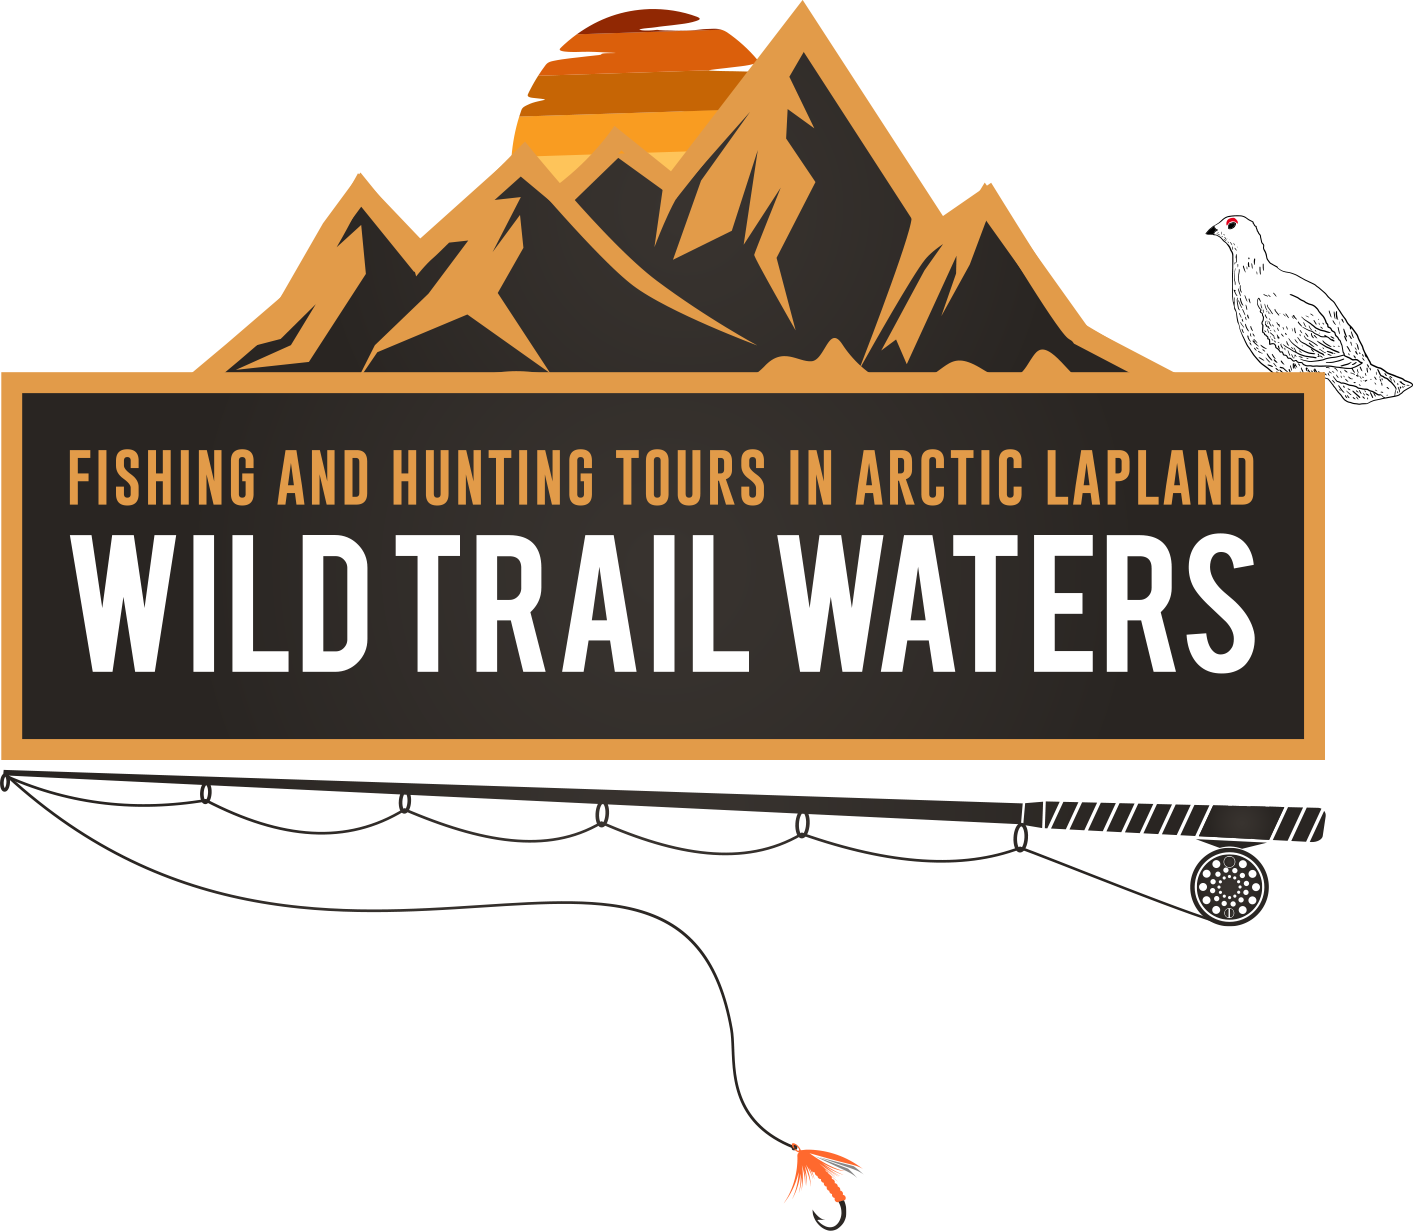 Wild Trail Waters – Fishing and hunting tours in Arctic Lapland